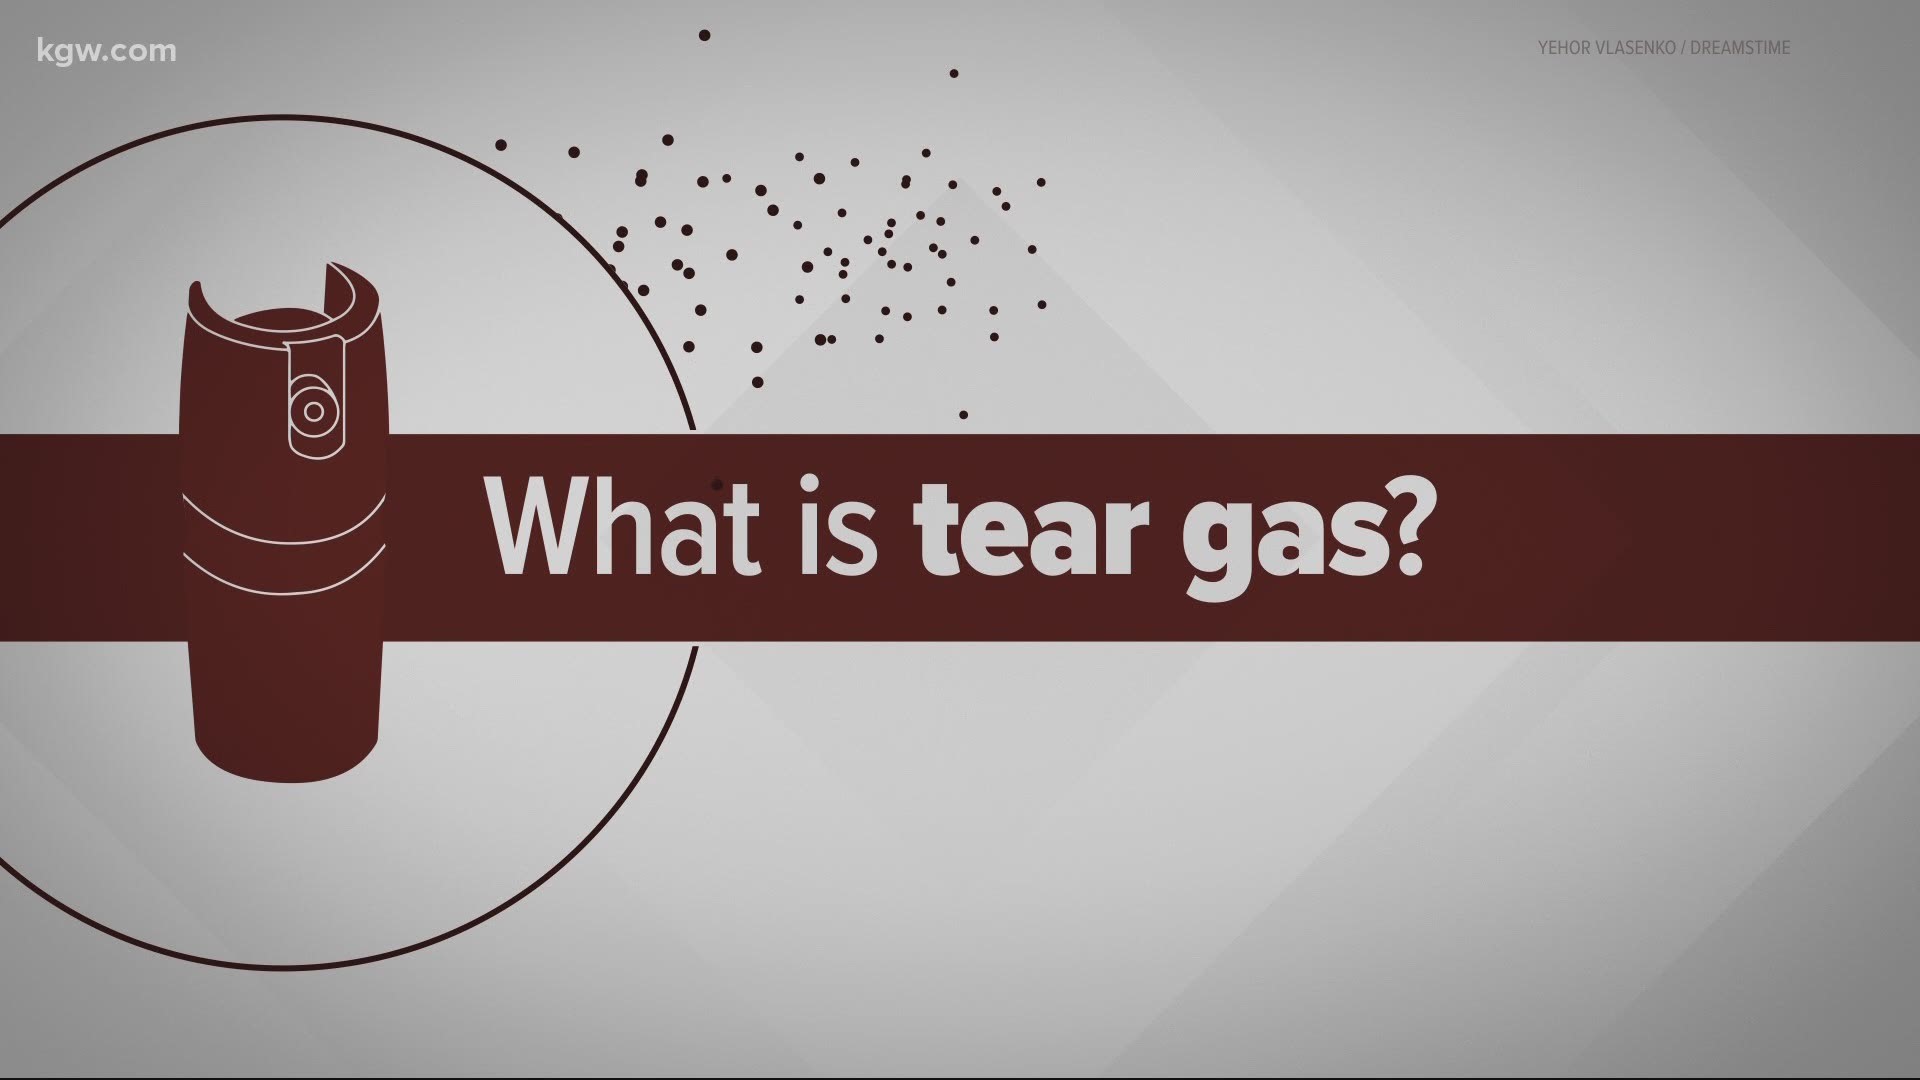 With questions being raised in Portland about the way the city is policed, let’s explain the difference between CS gas and tear gas.